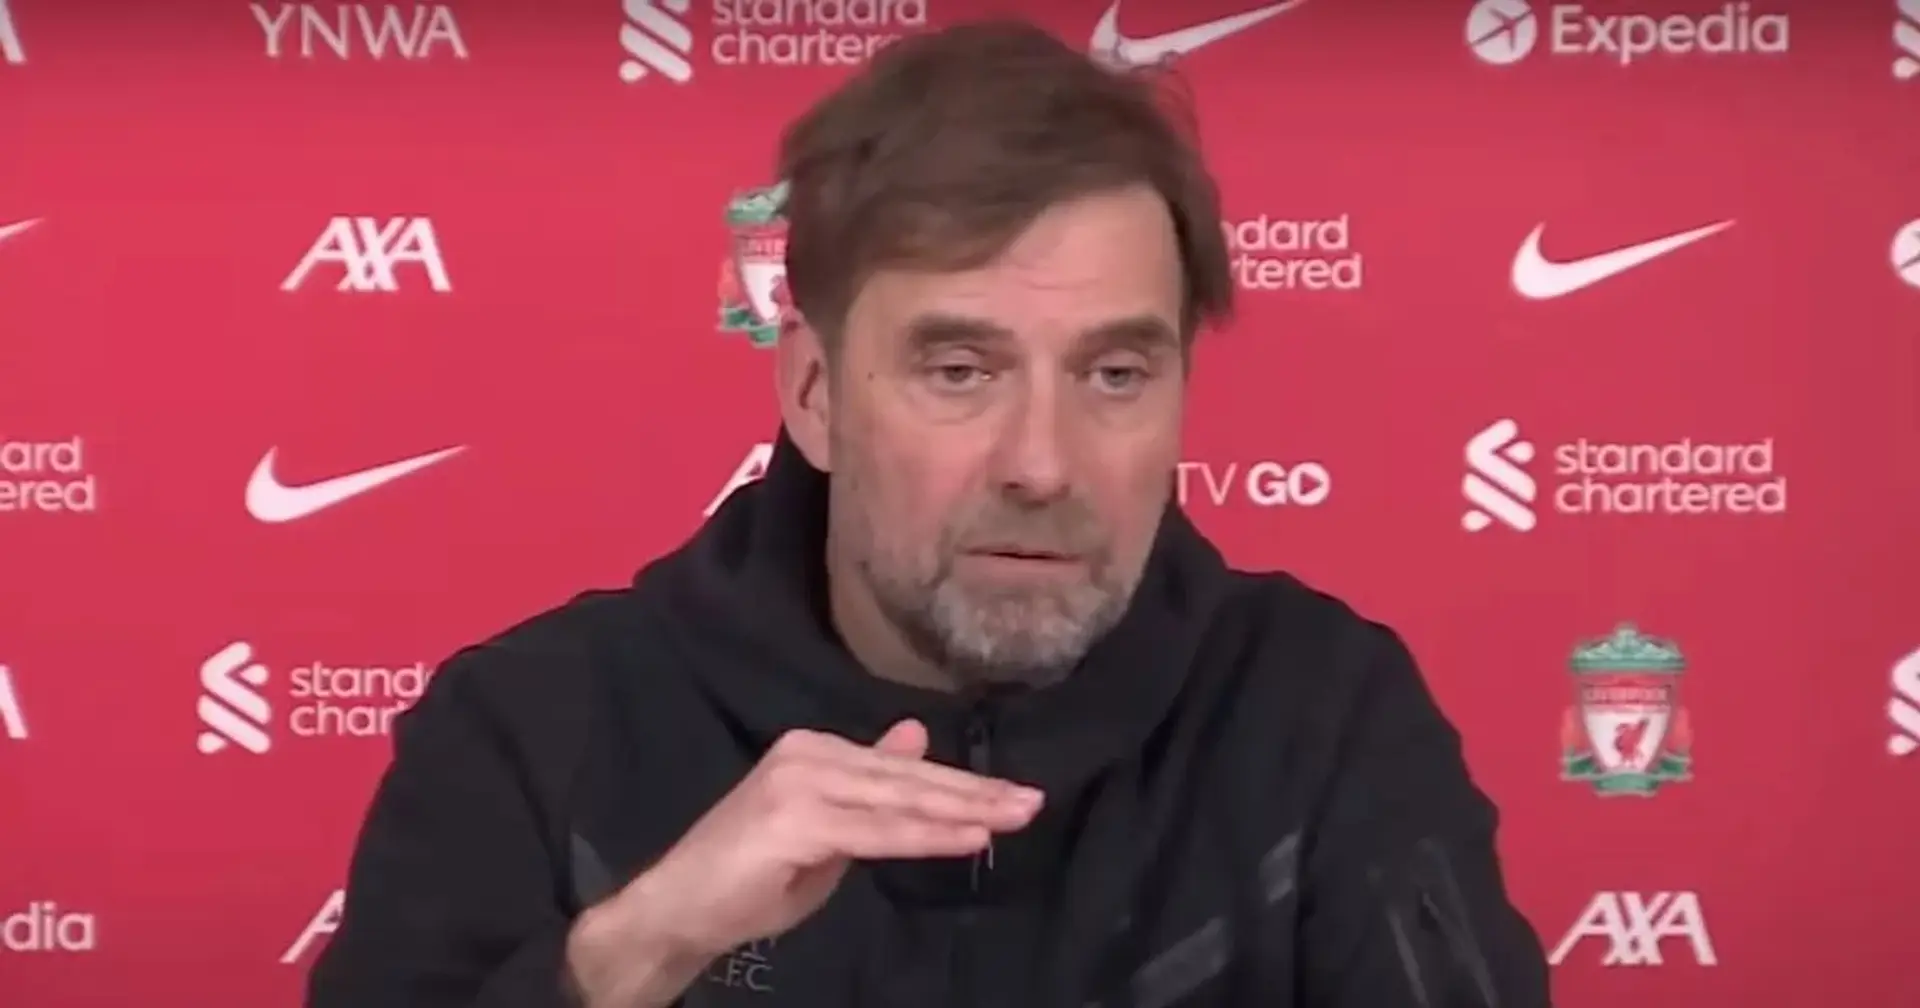 'I'd say that’s consistent': Klopp responds to Forest claims Nunez's goal had to be cancelled